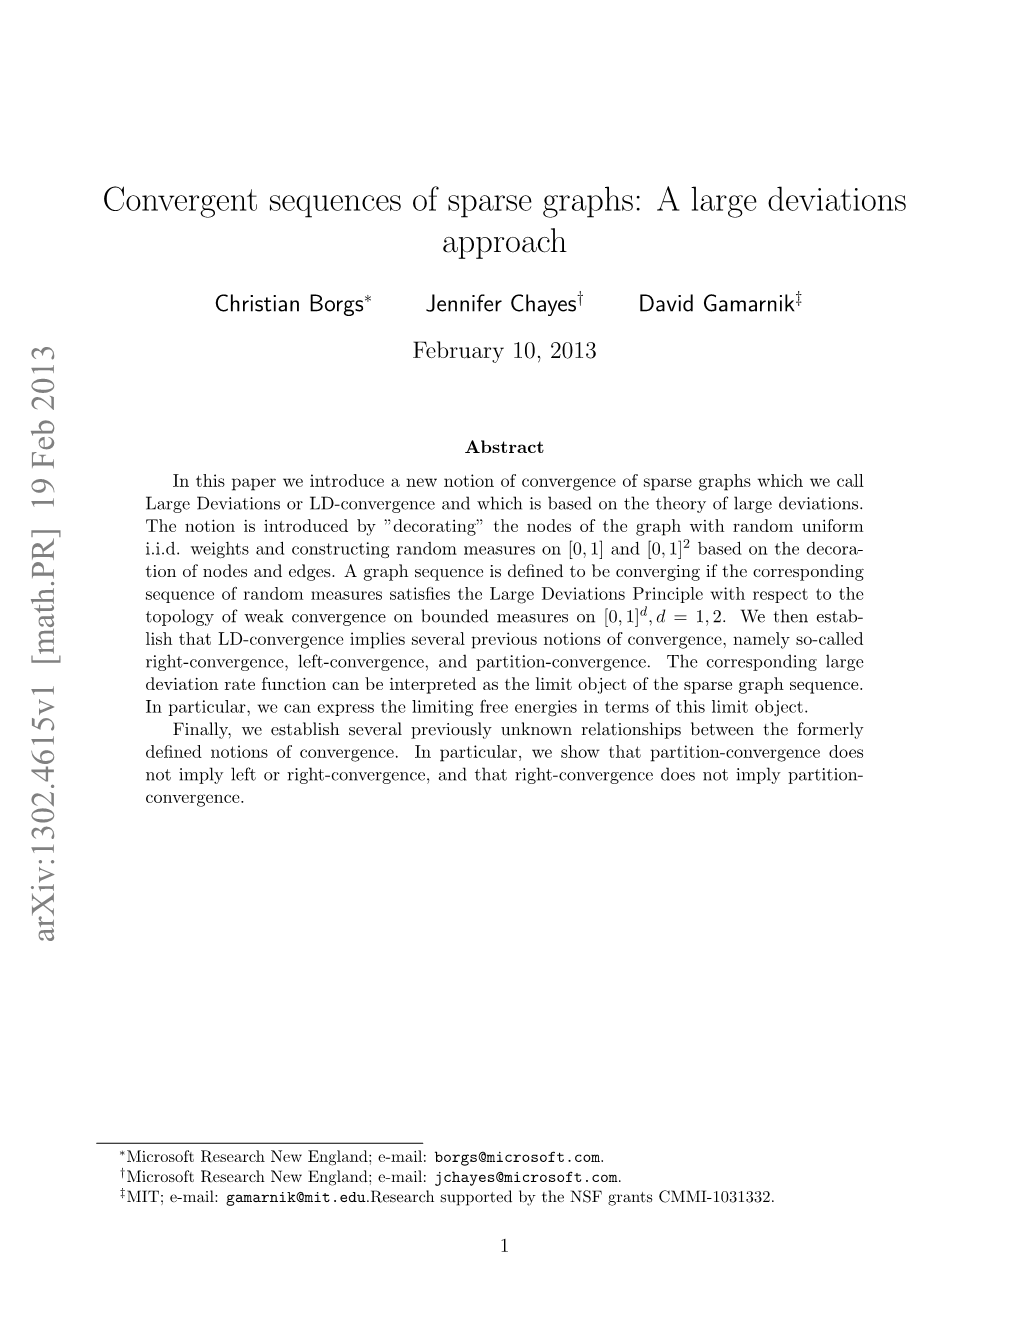 Convergent Sequences of Sparse Graphs: a Large Deviations Approach